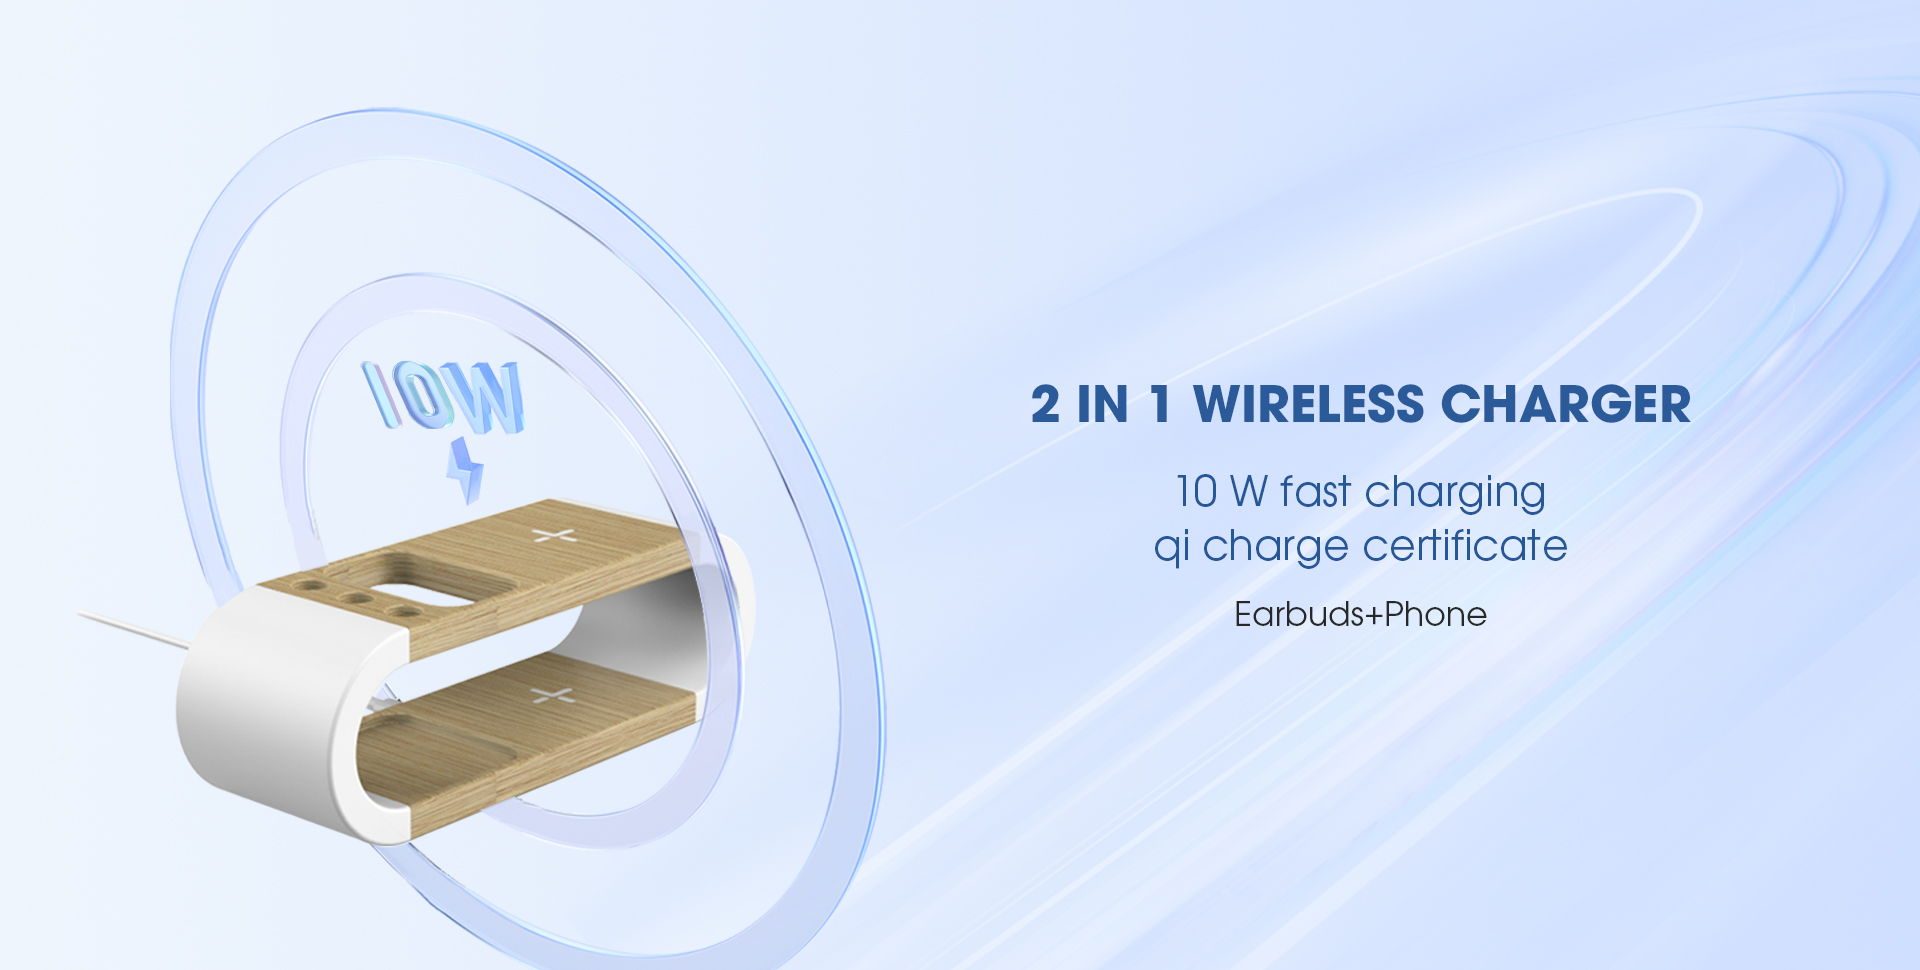 2 in 1 wireless charger,10w fast charge,qi safe charge certificate